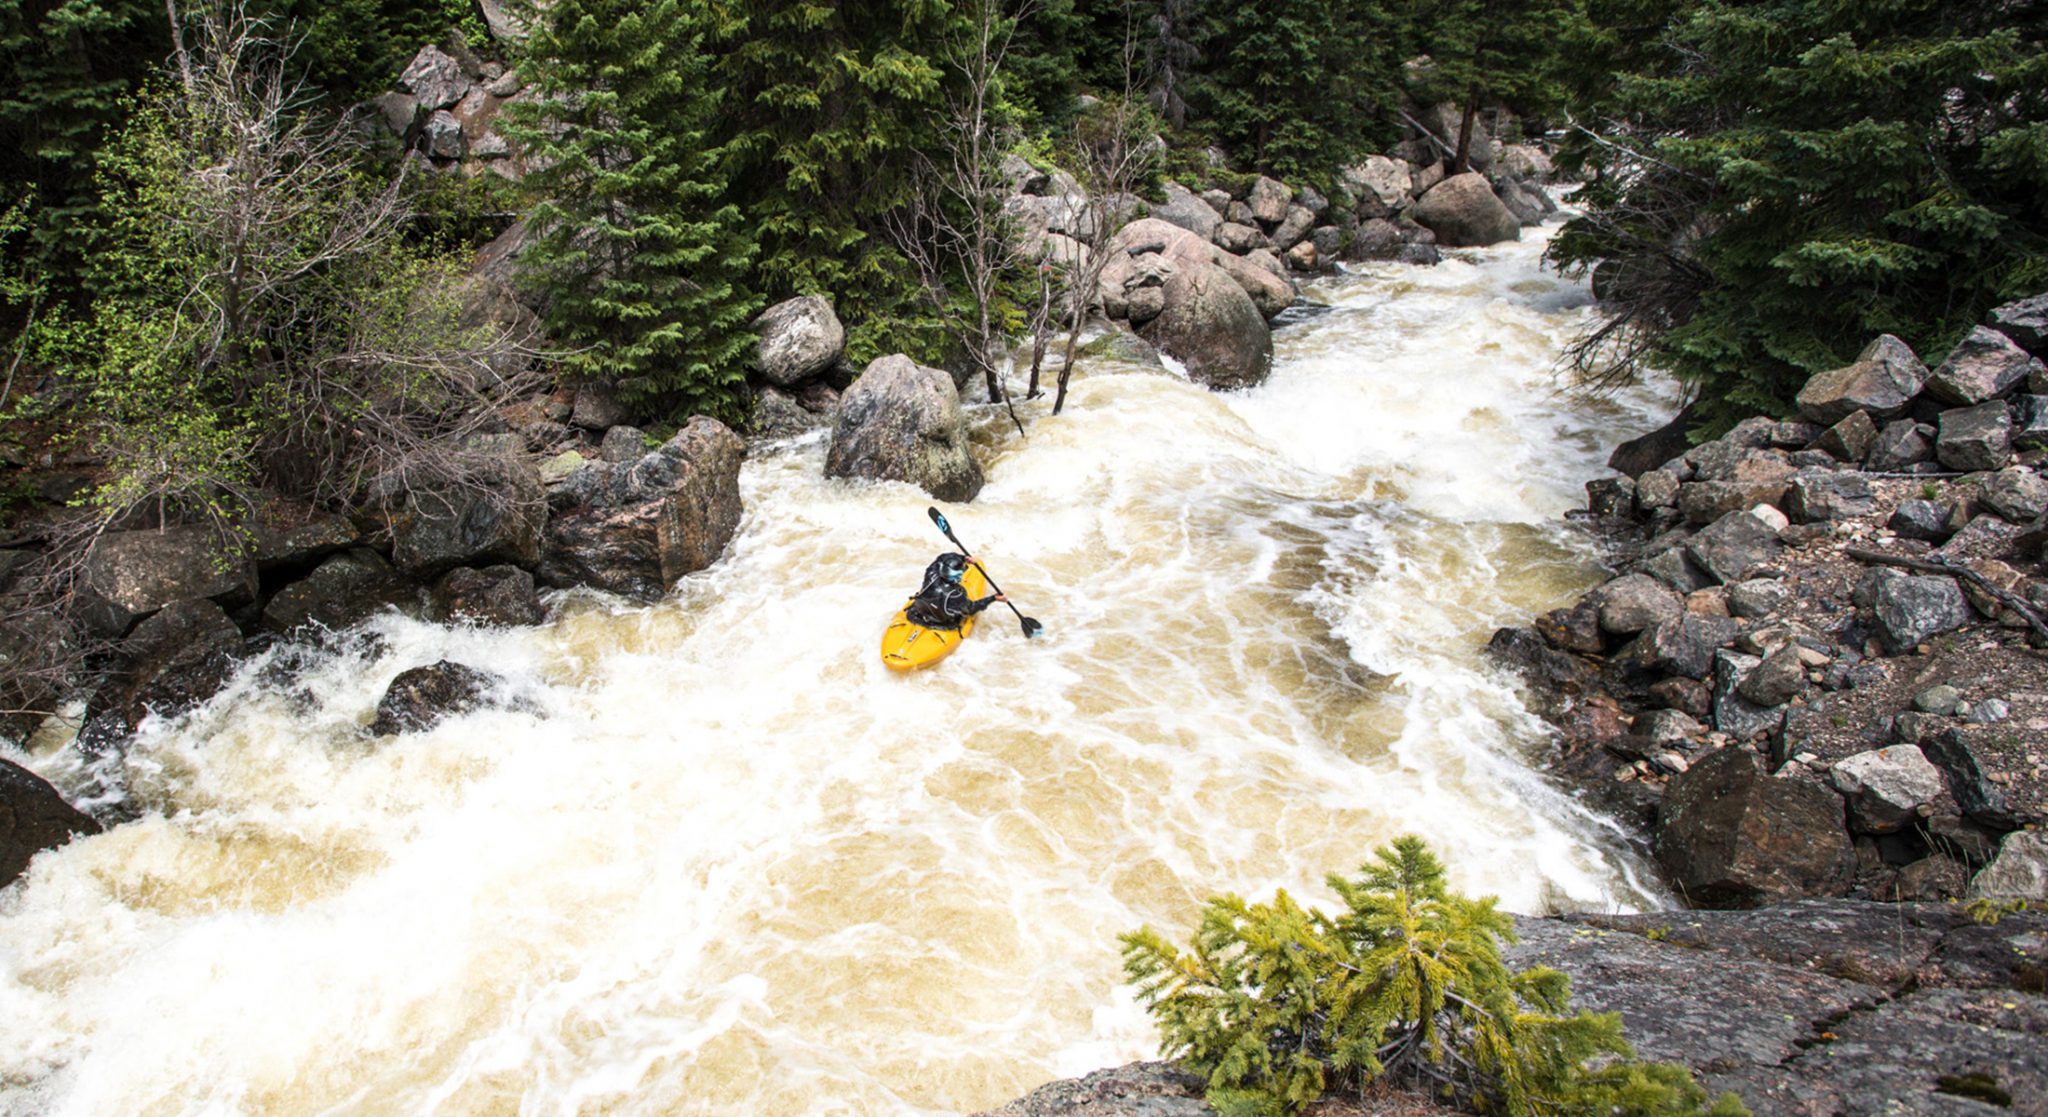 Adrenaline Pumping Kayaking Adventure in a Forest.